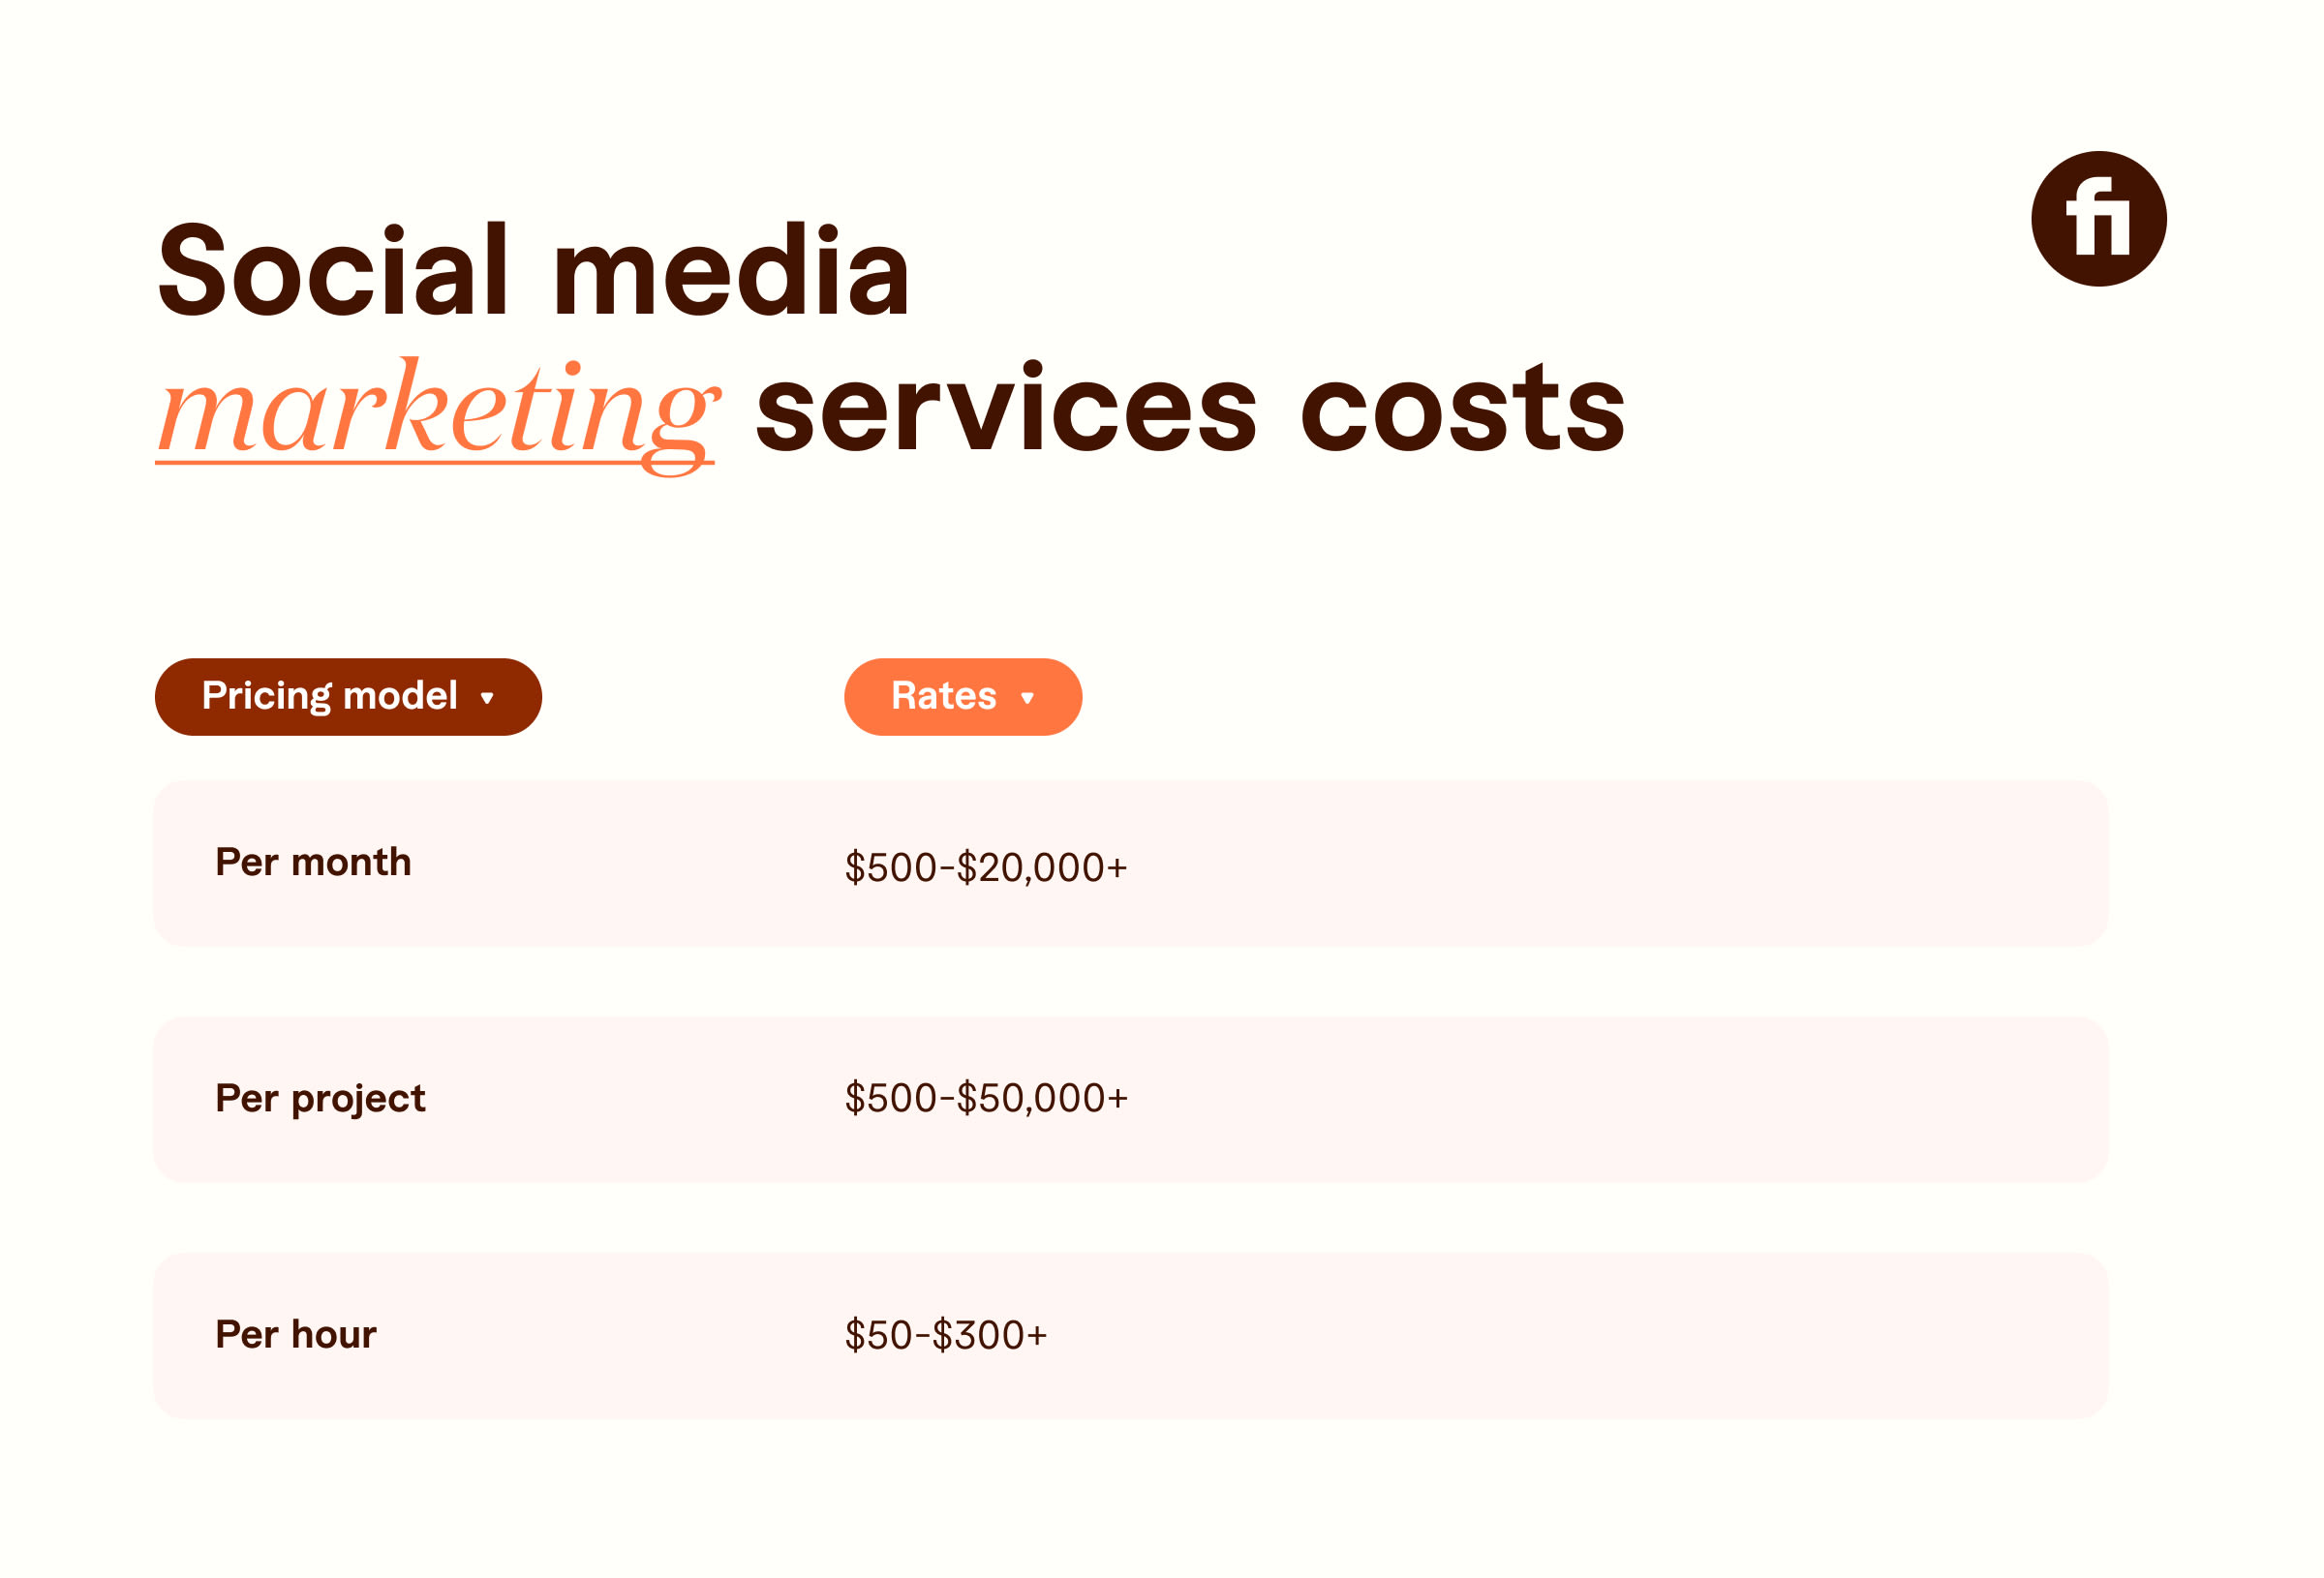 graph showing social media marketing service costs